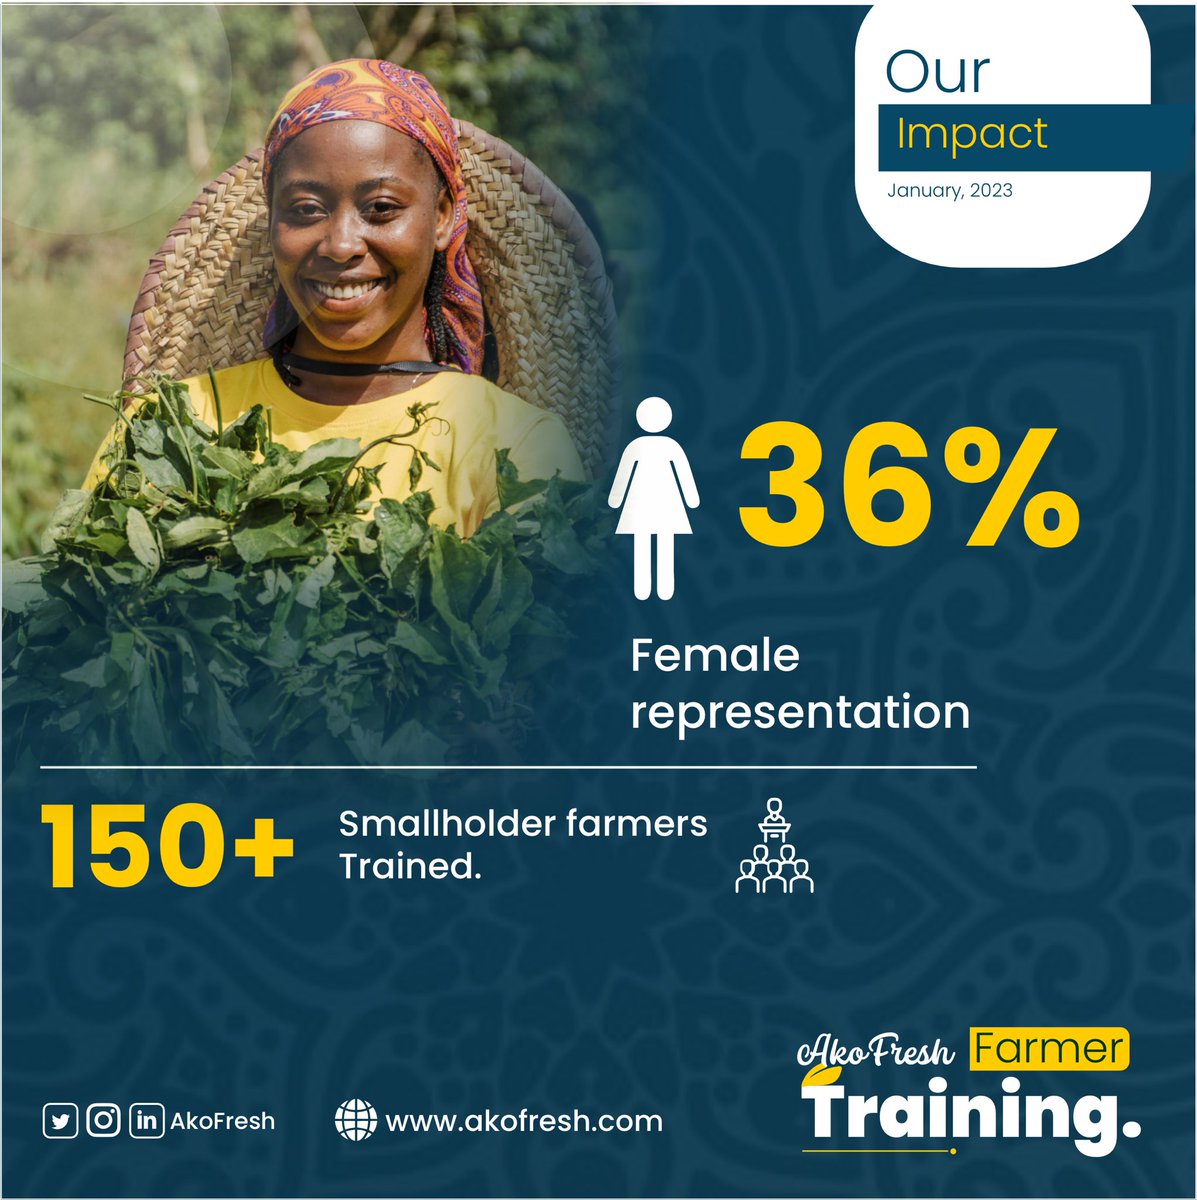 It was exciting to see nearly 40% women participating in our first farmer training for the year and we look forward to reaching up to 50% women representation in the coming months 

1/2

#AkoFreshFarmerTraining
#womenfarmers 
#impact